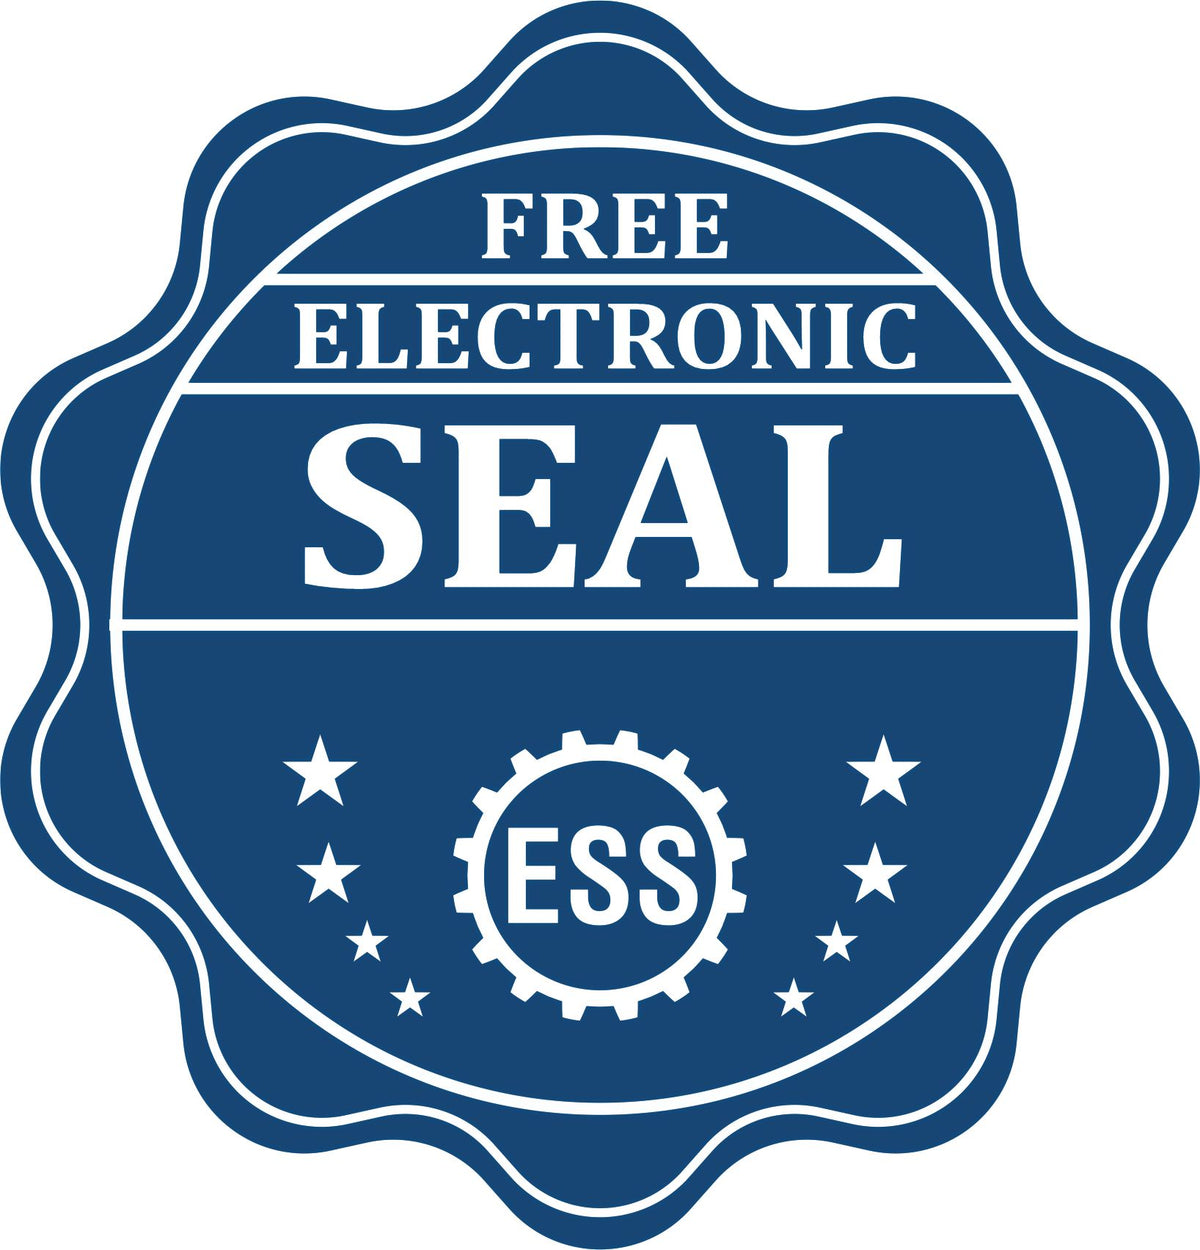 A badge showing a free electronic seal for the Handheld Florida Professional Engineer Embosser with stars and the ESS gear on the emblem.